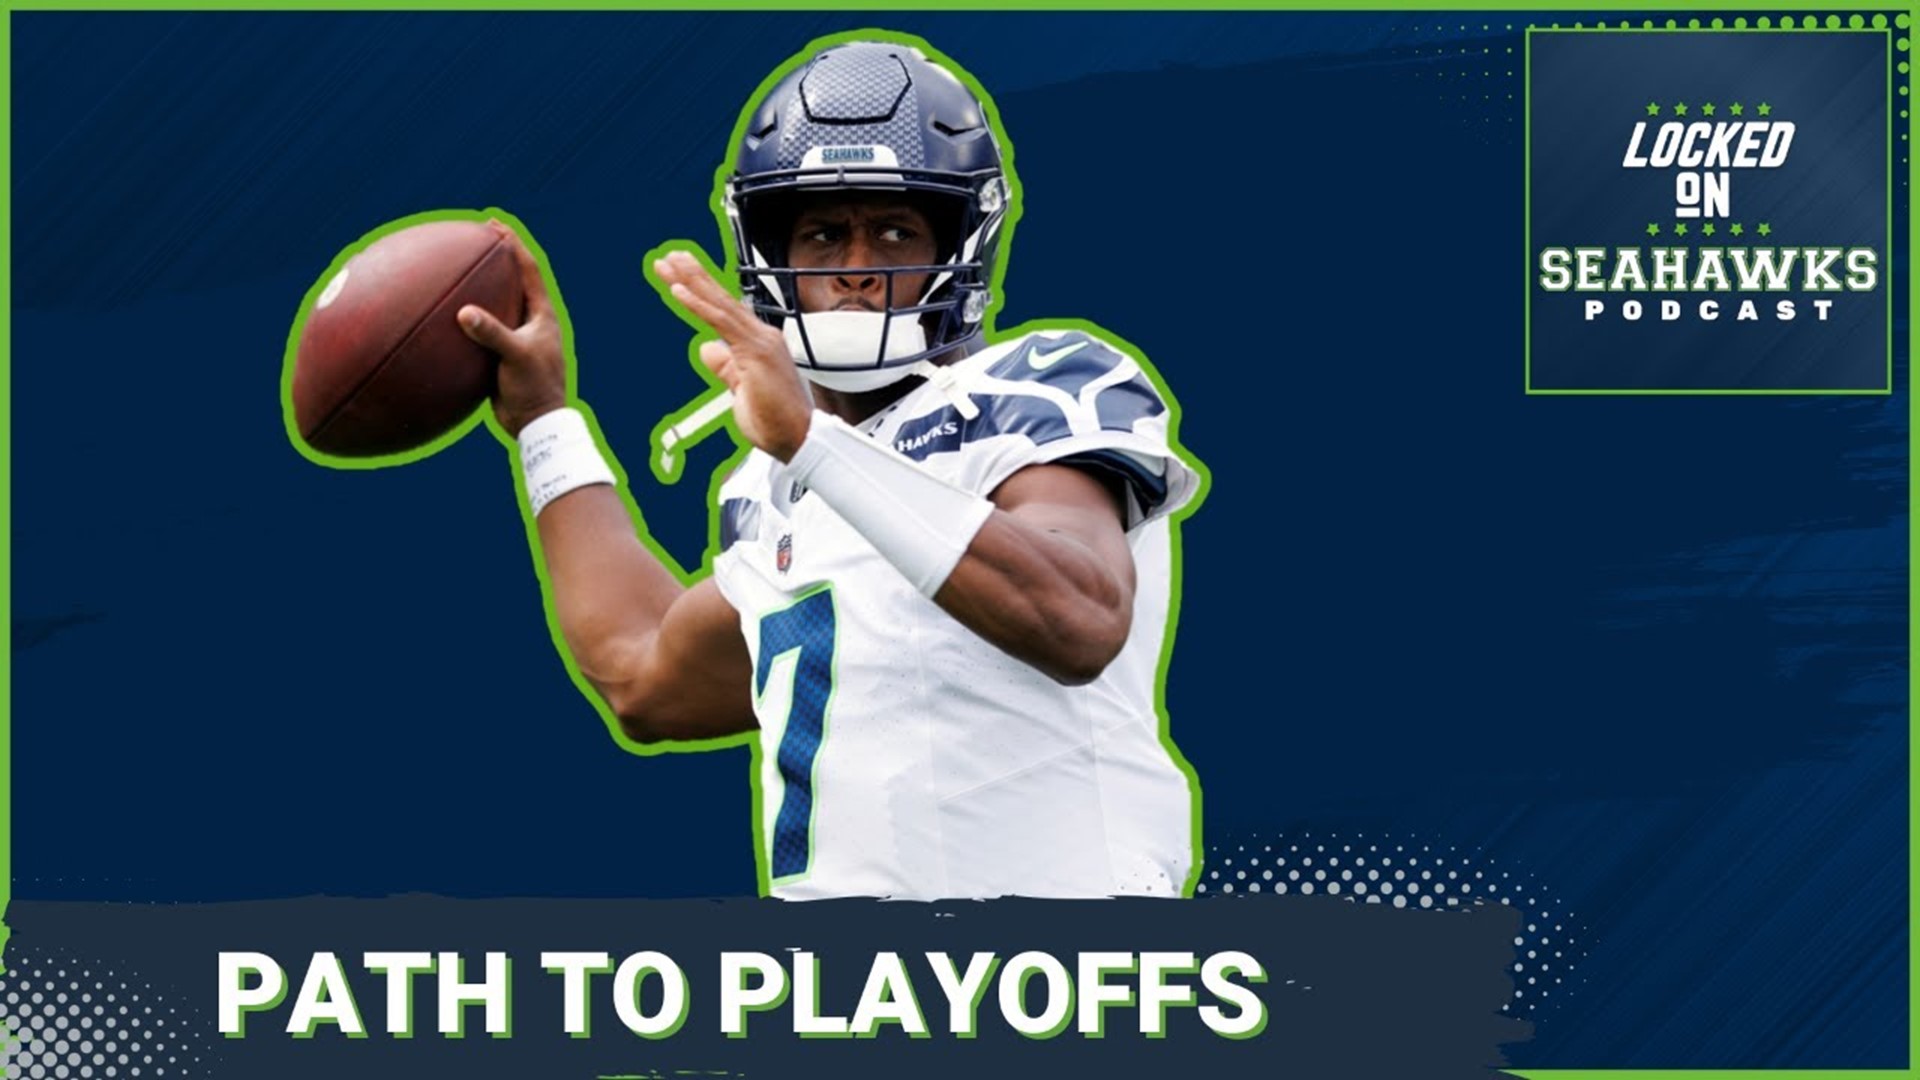 Coming off a much-needed win over the Philadelphia Eagles, the Seattle Seahawks remain on the outside looking in as part of the NFC playoff picture, can they make it